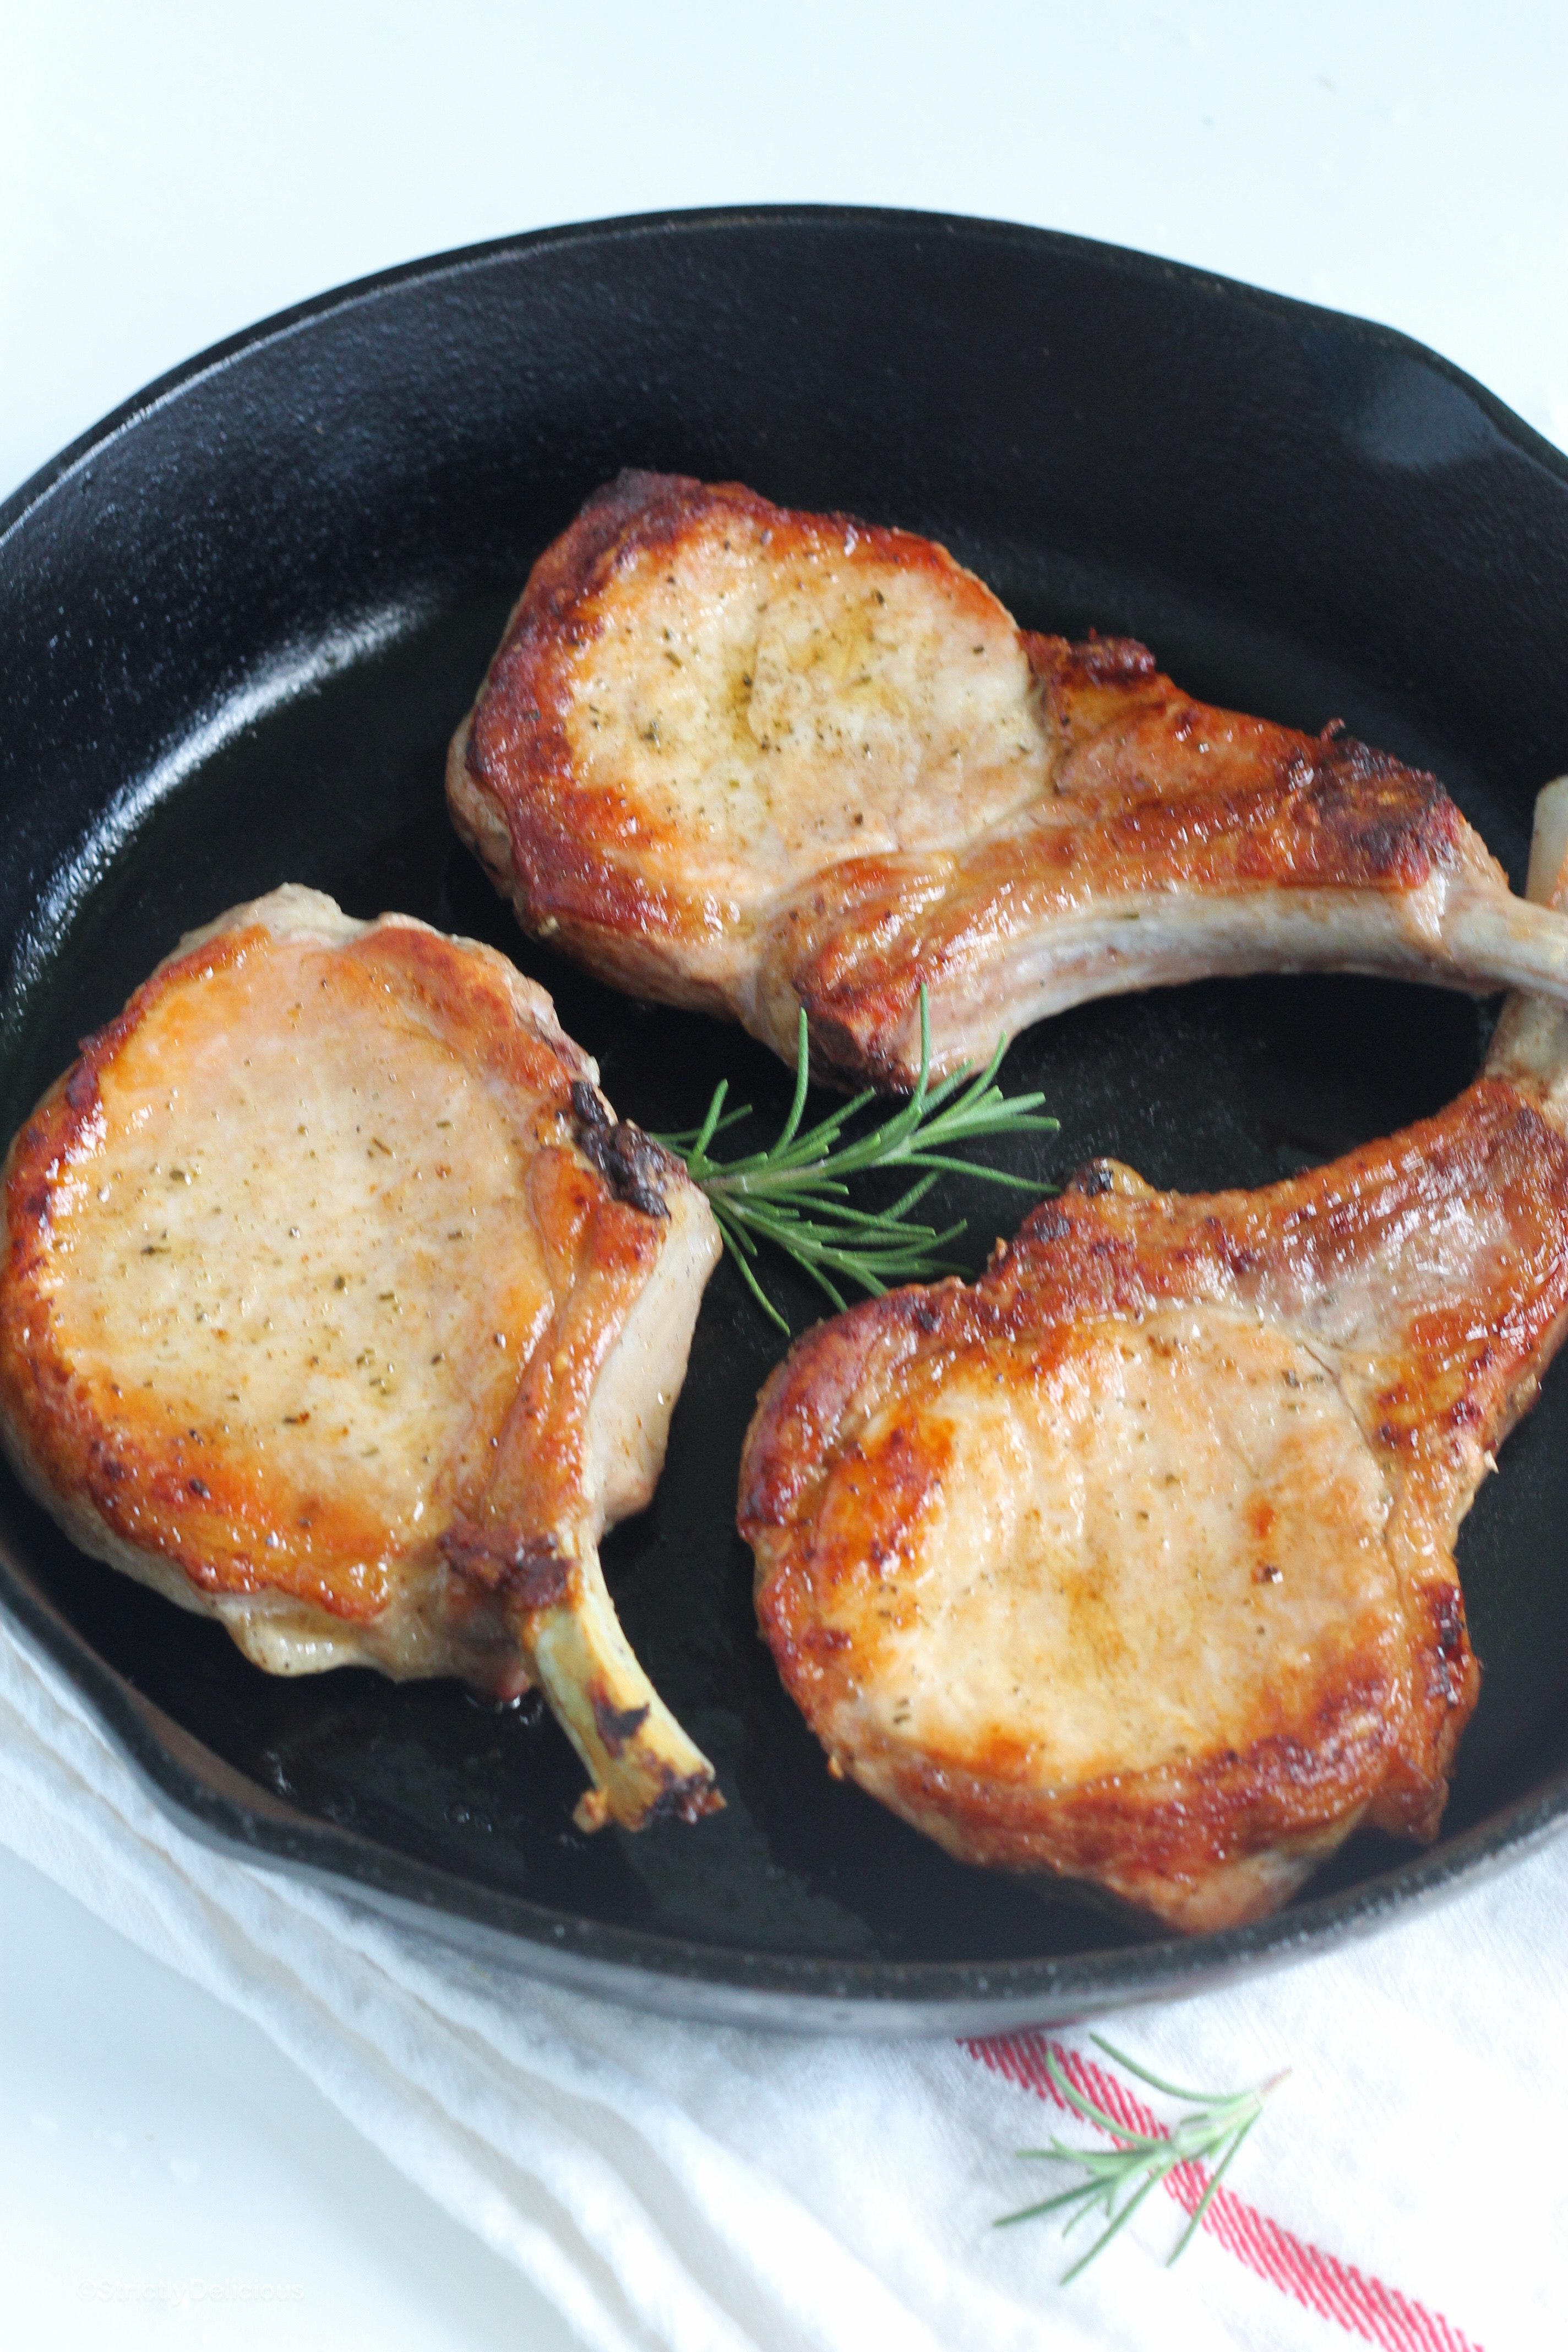 Best Way To Make Pork Chops
 How to Cook Perfect Pork Chops